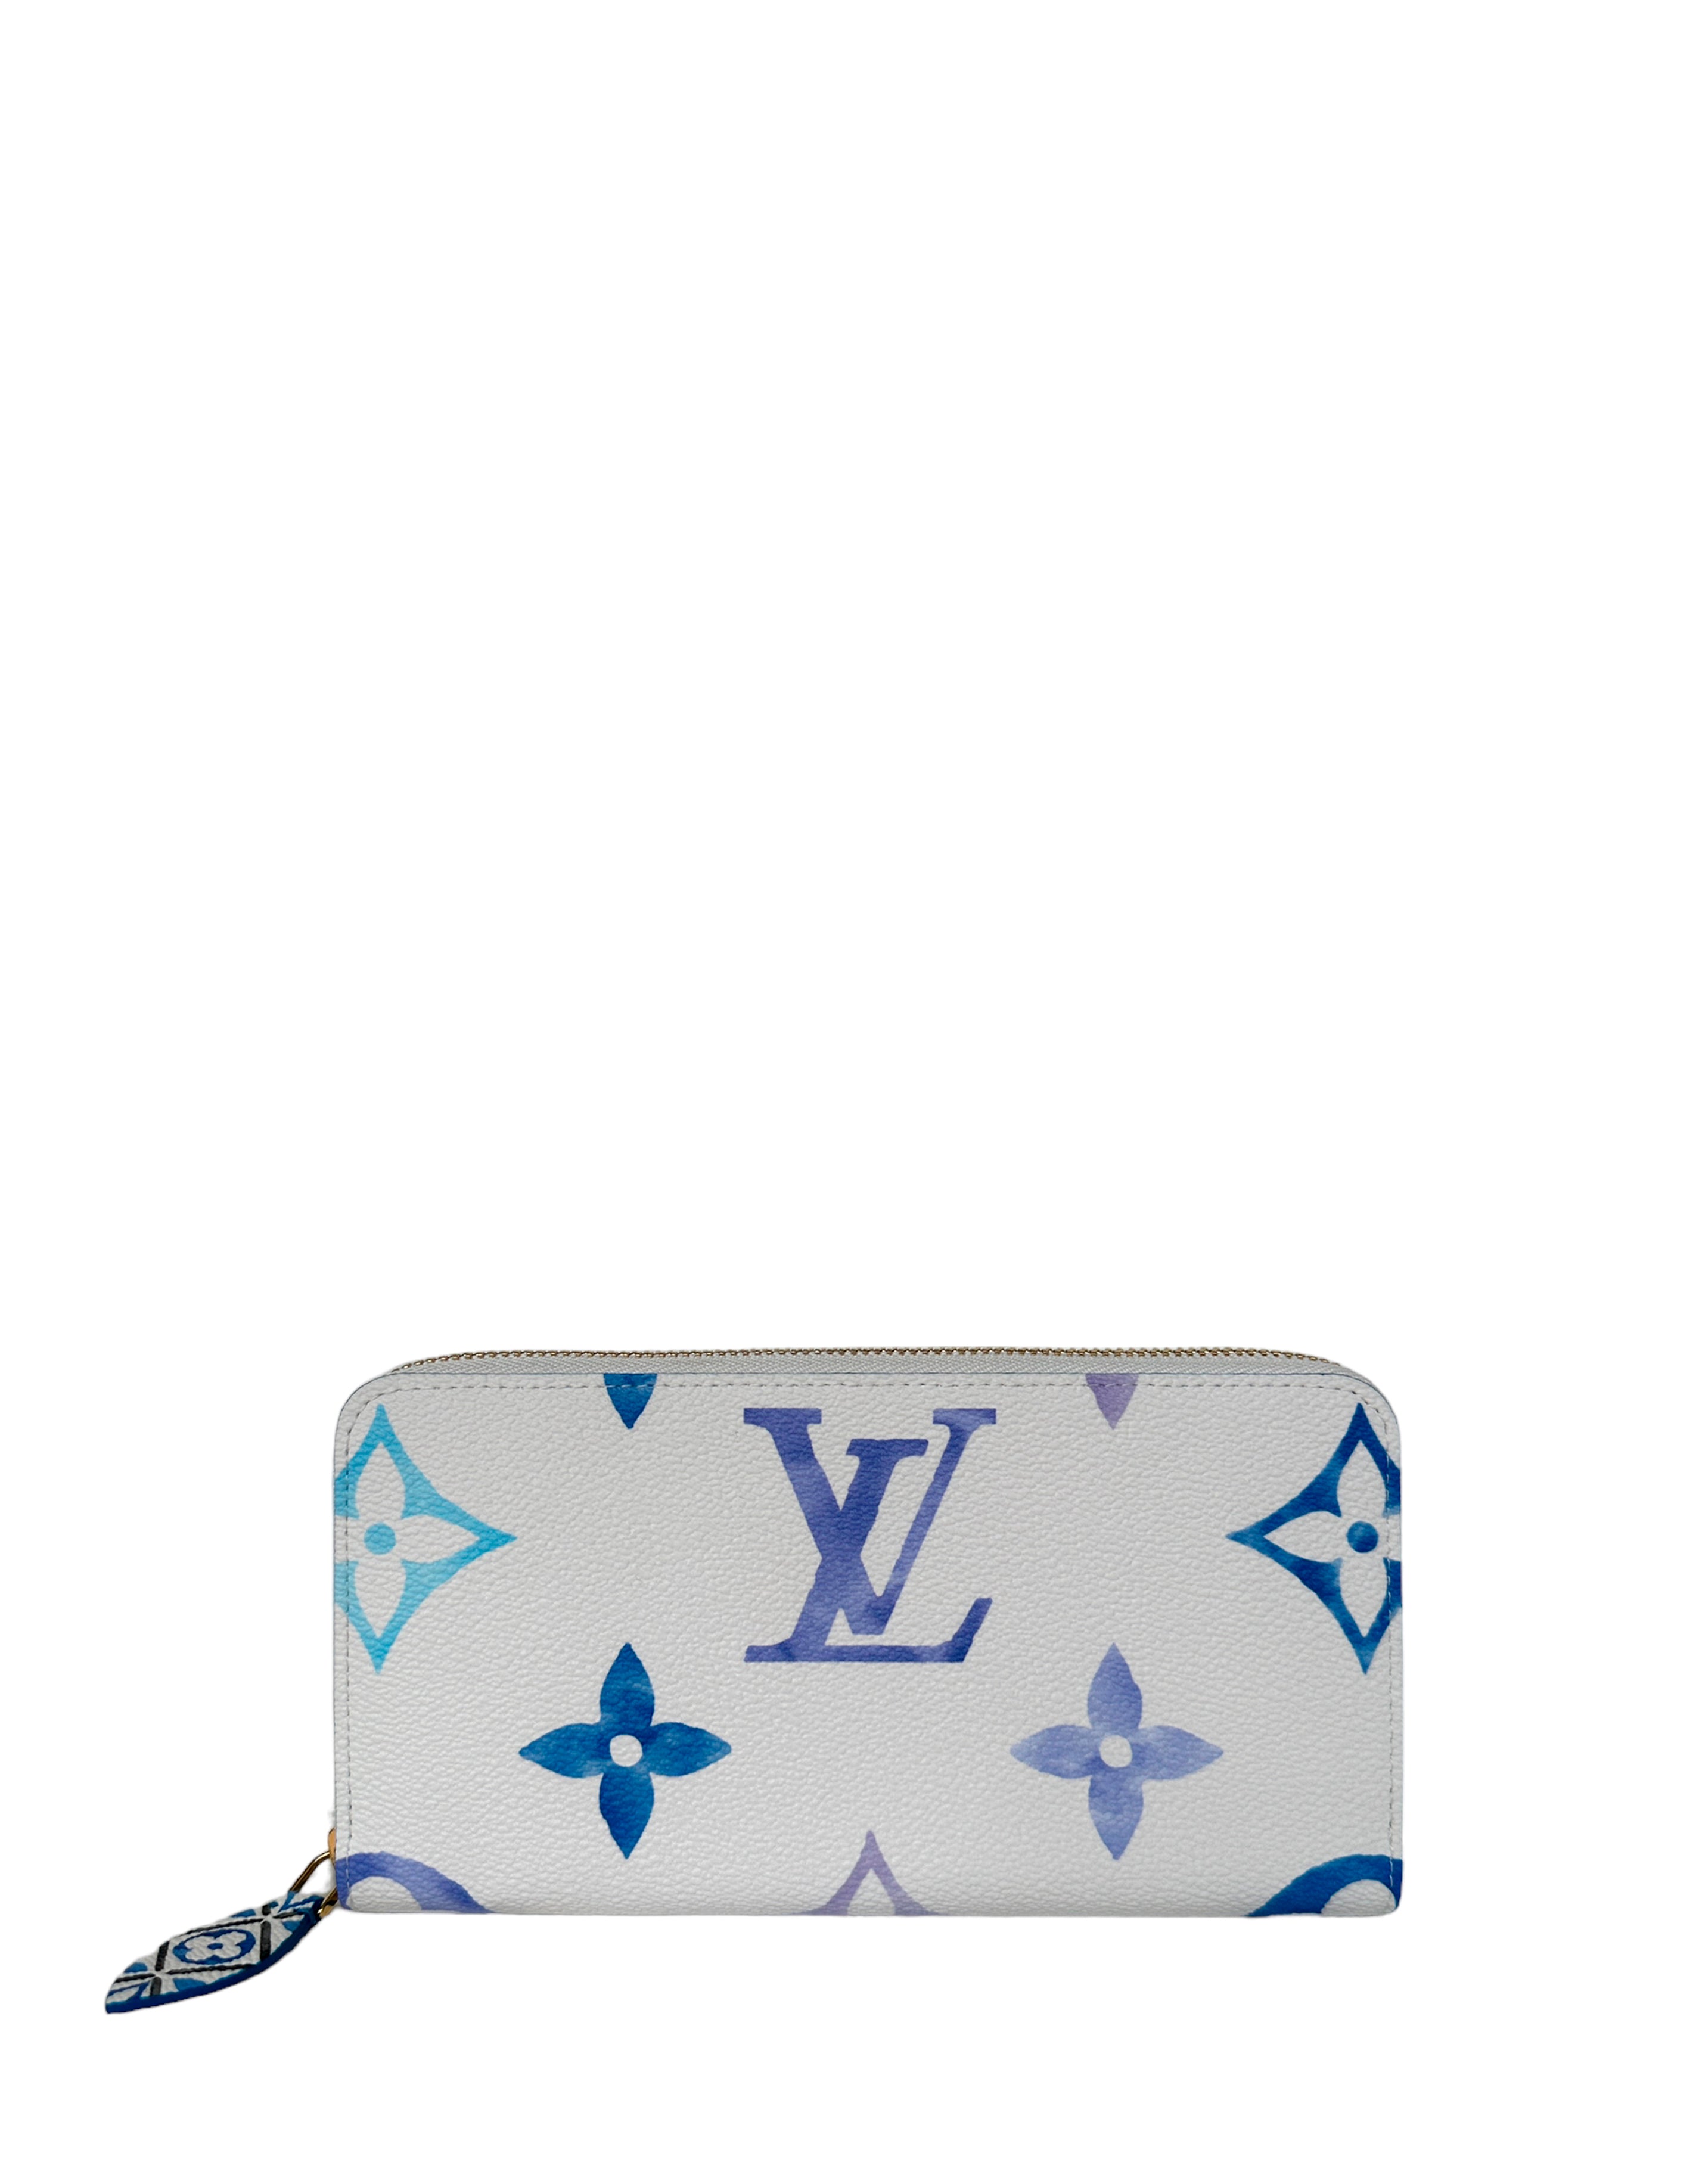 LOUIS VUITTON BY THE POOL LARGE ZIPPY WALLET MIST BRUME Giant